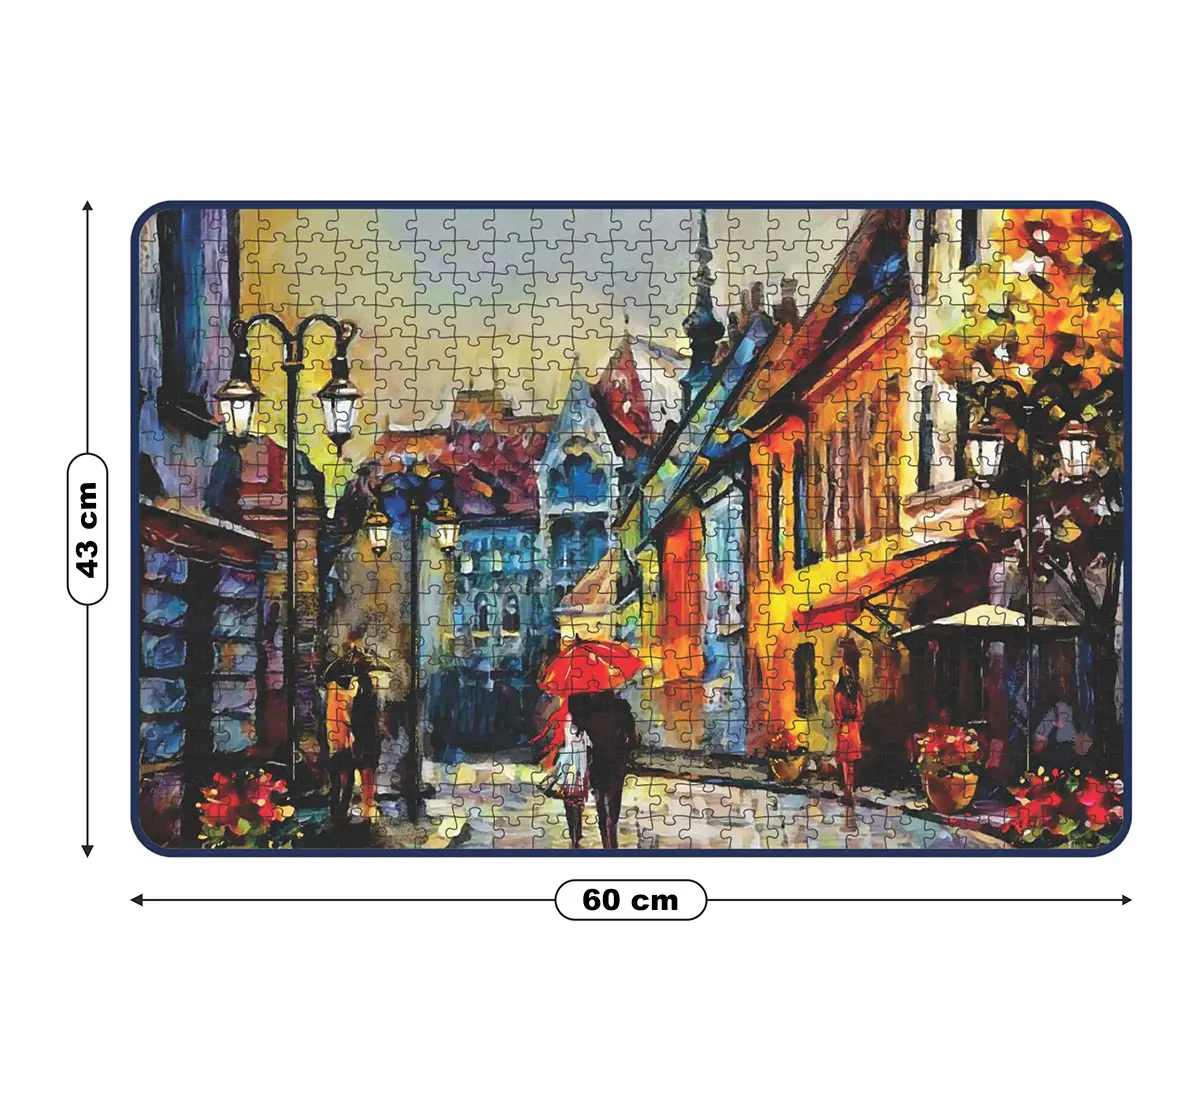 Webby Street in Hungary Puzzle 500pcs,  6Y+ (Multicolour)